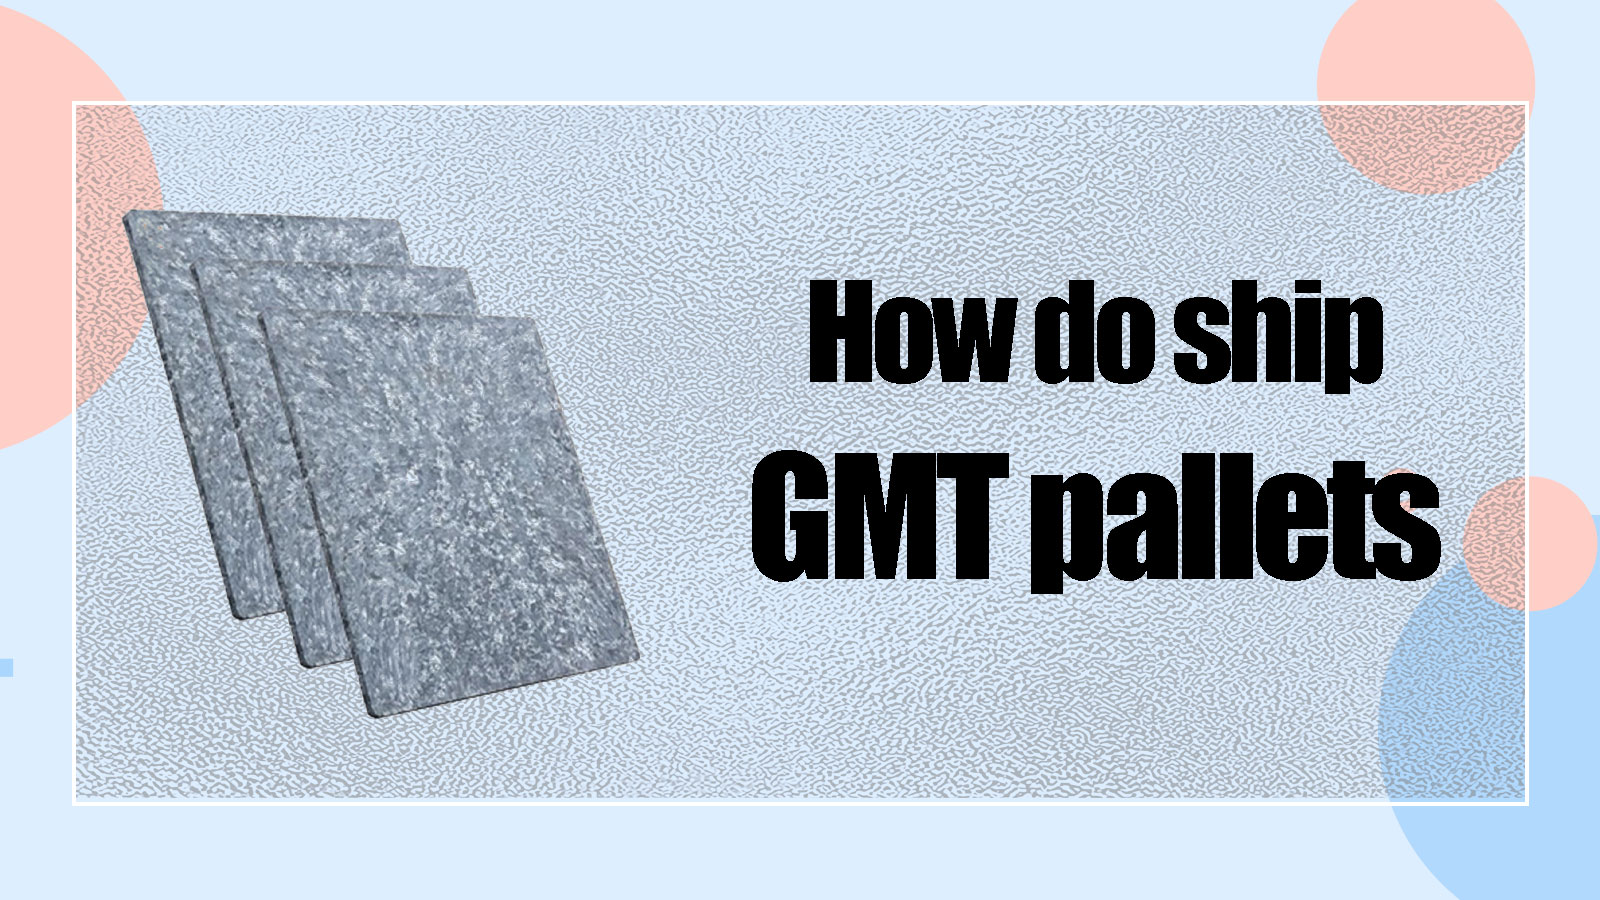 How do ship GMT pallets